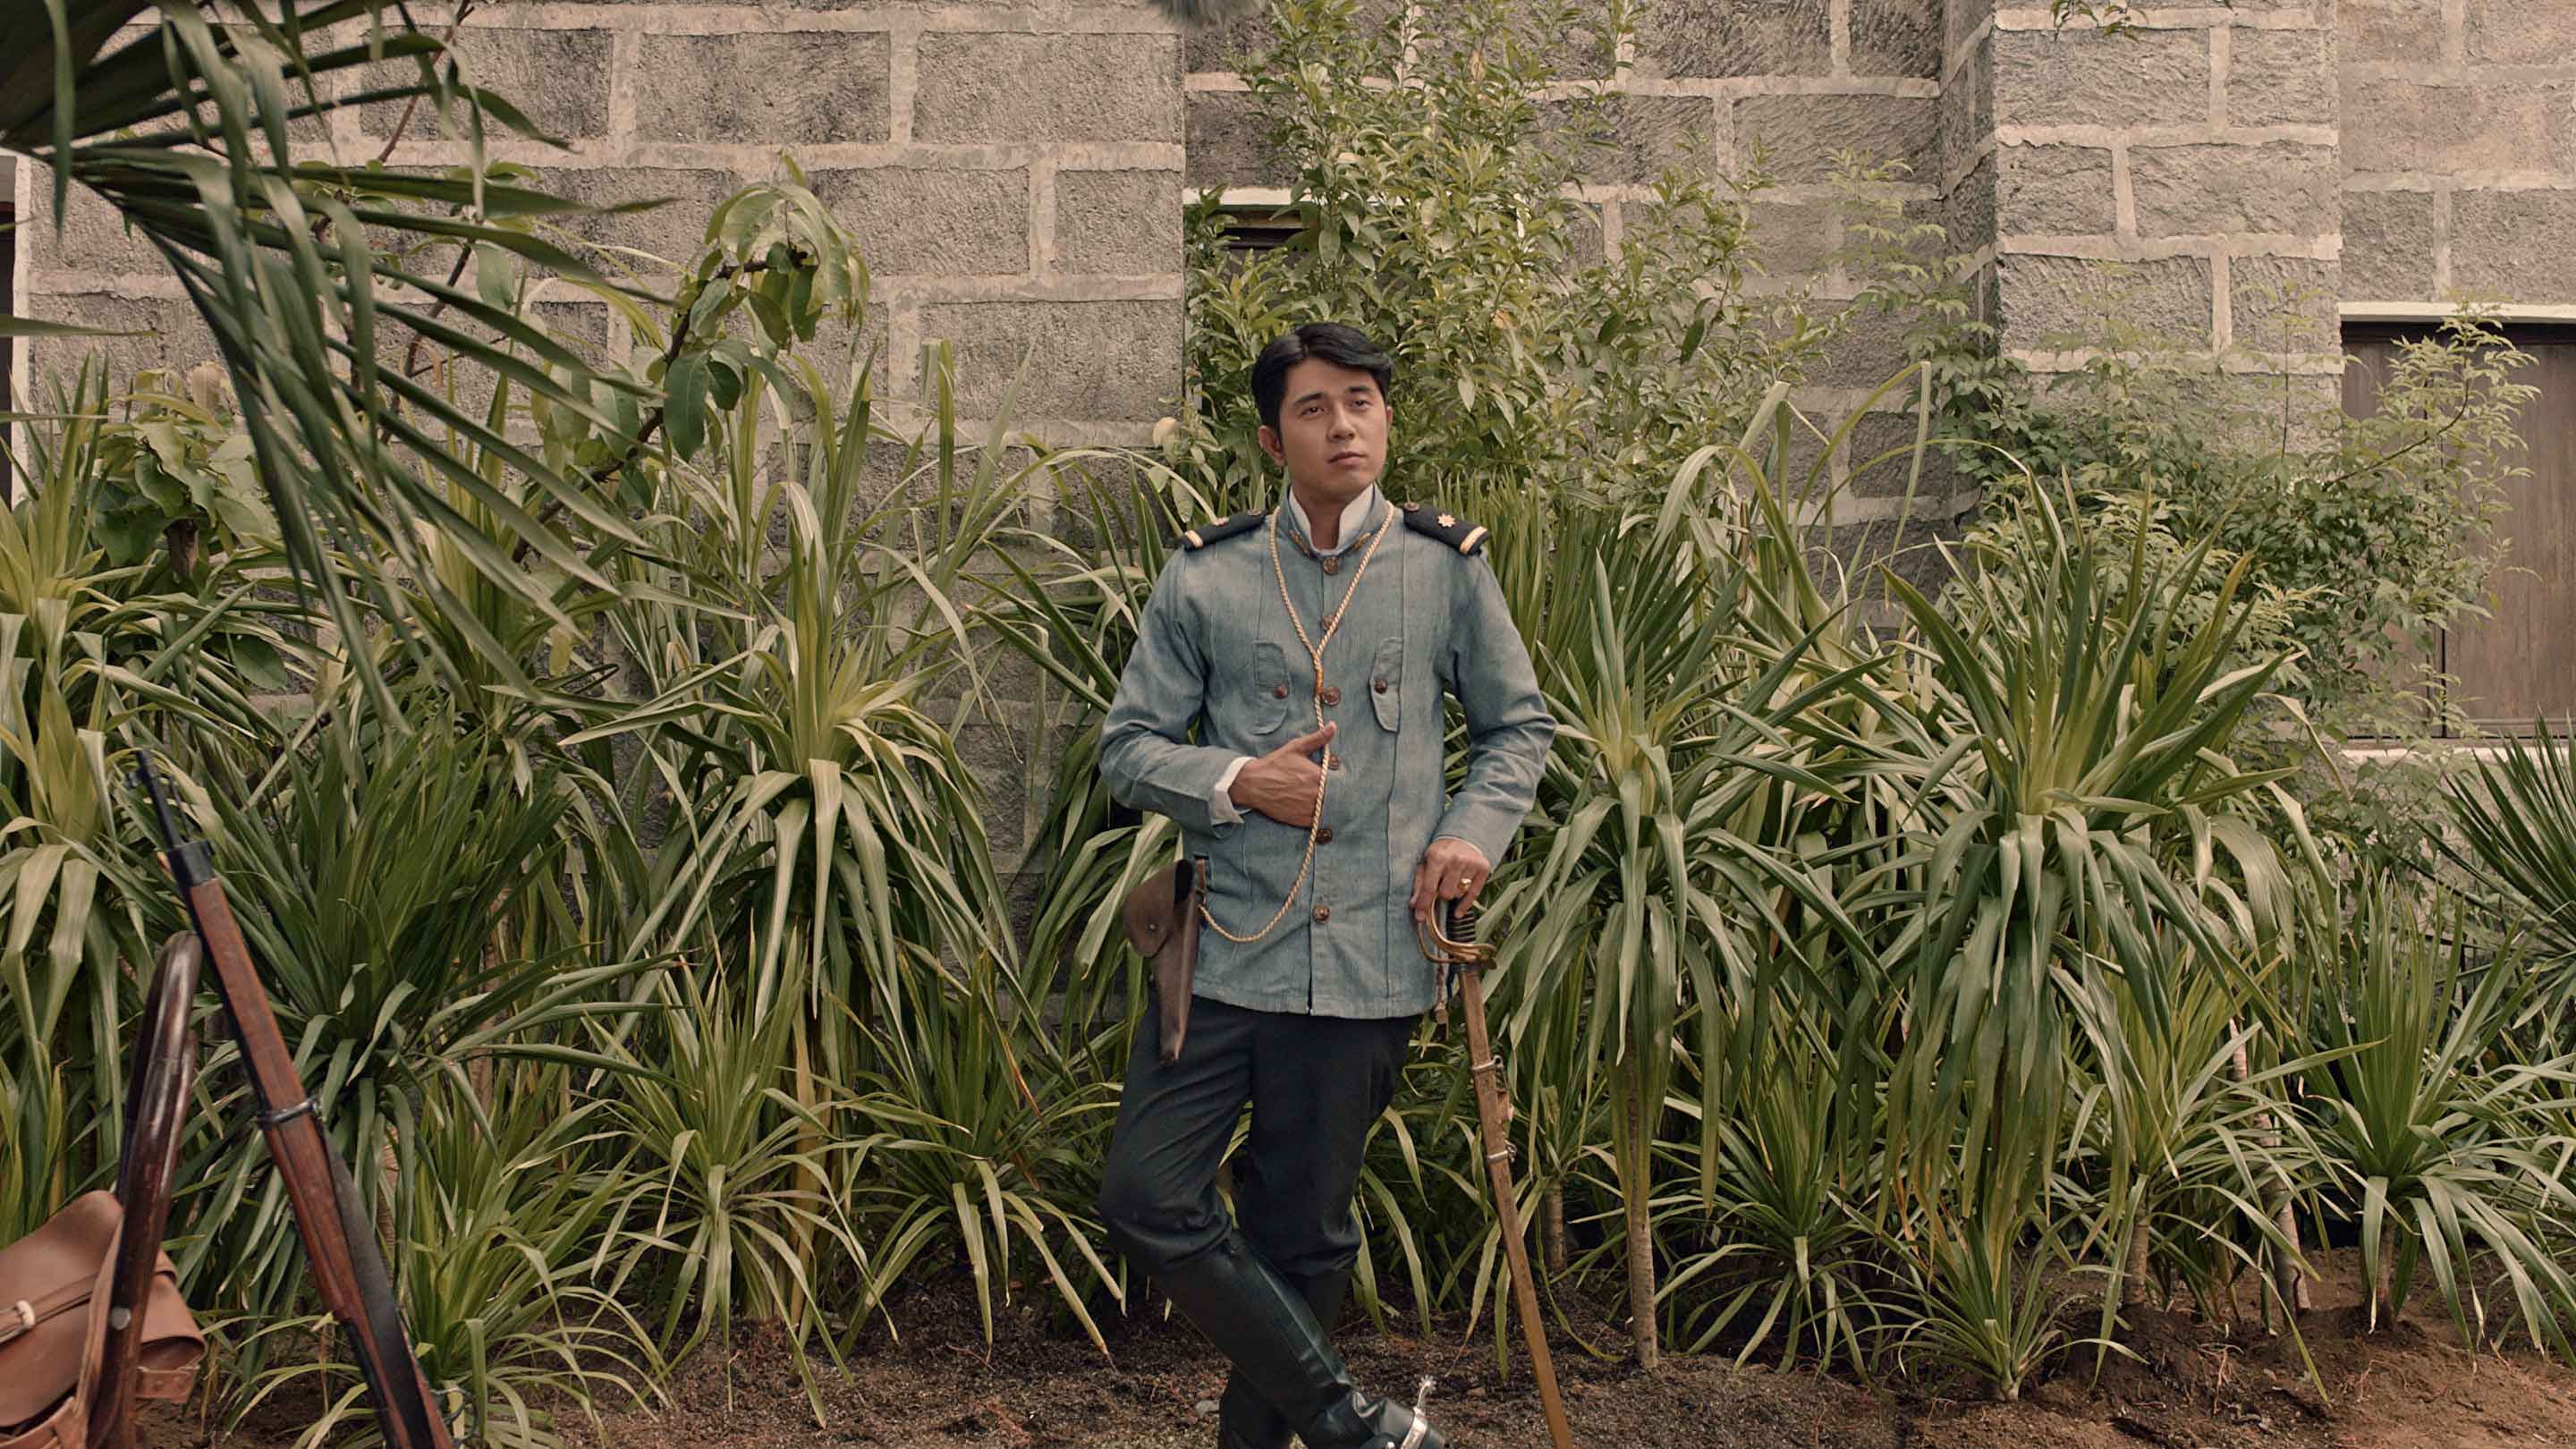 GOYO Portrays Del Pilar as a Young Man in Conflict – His Death, a Meaningless Tragedy #5SecReview